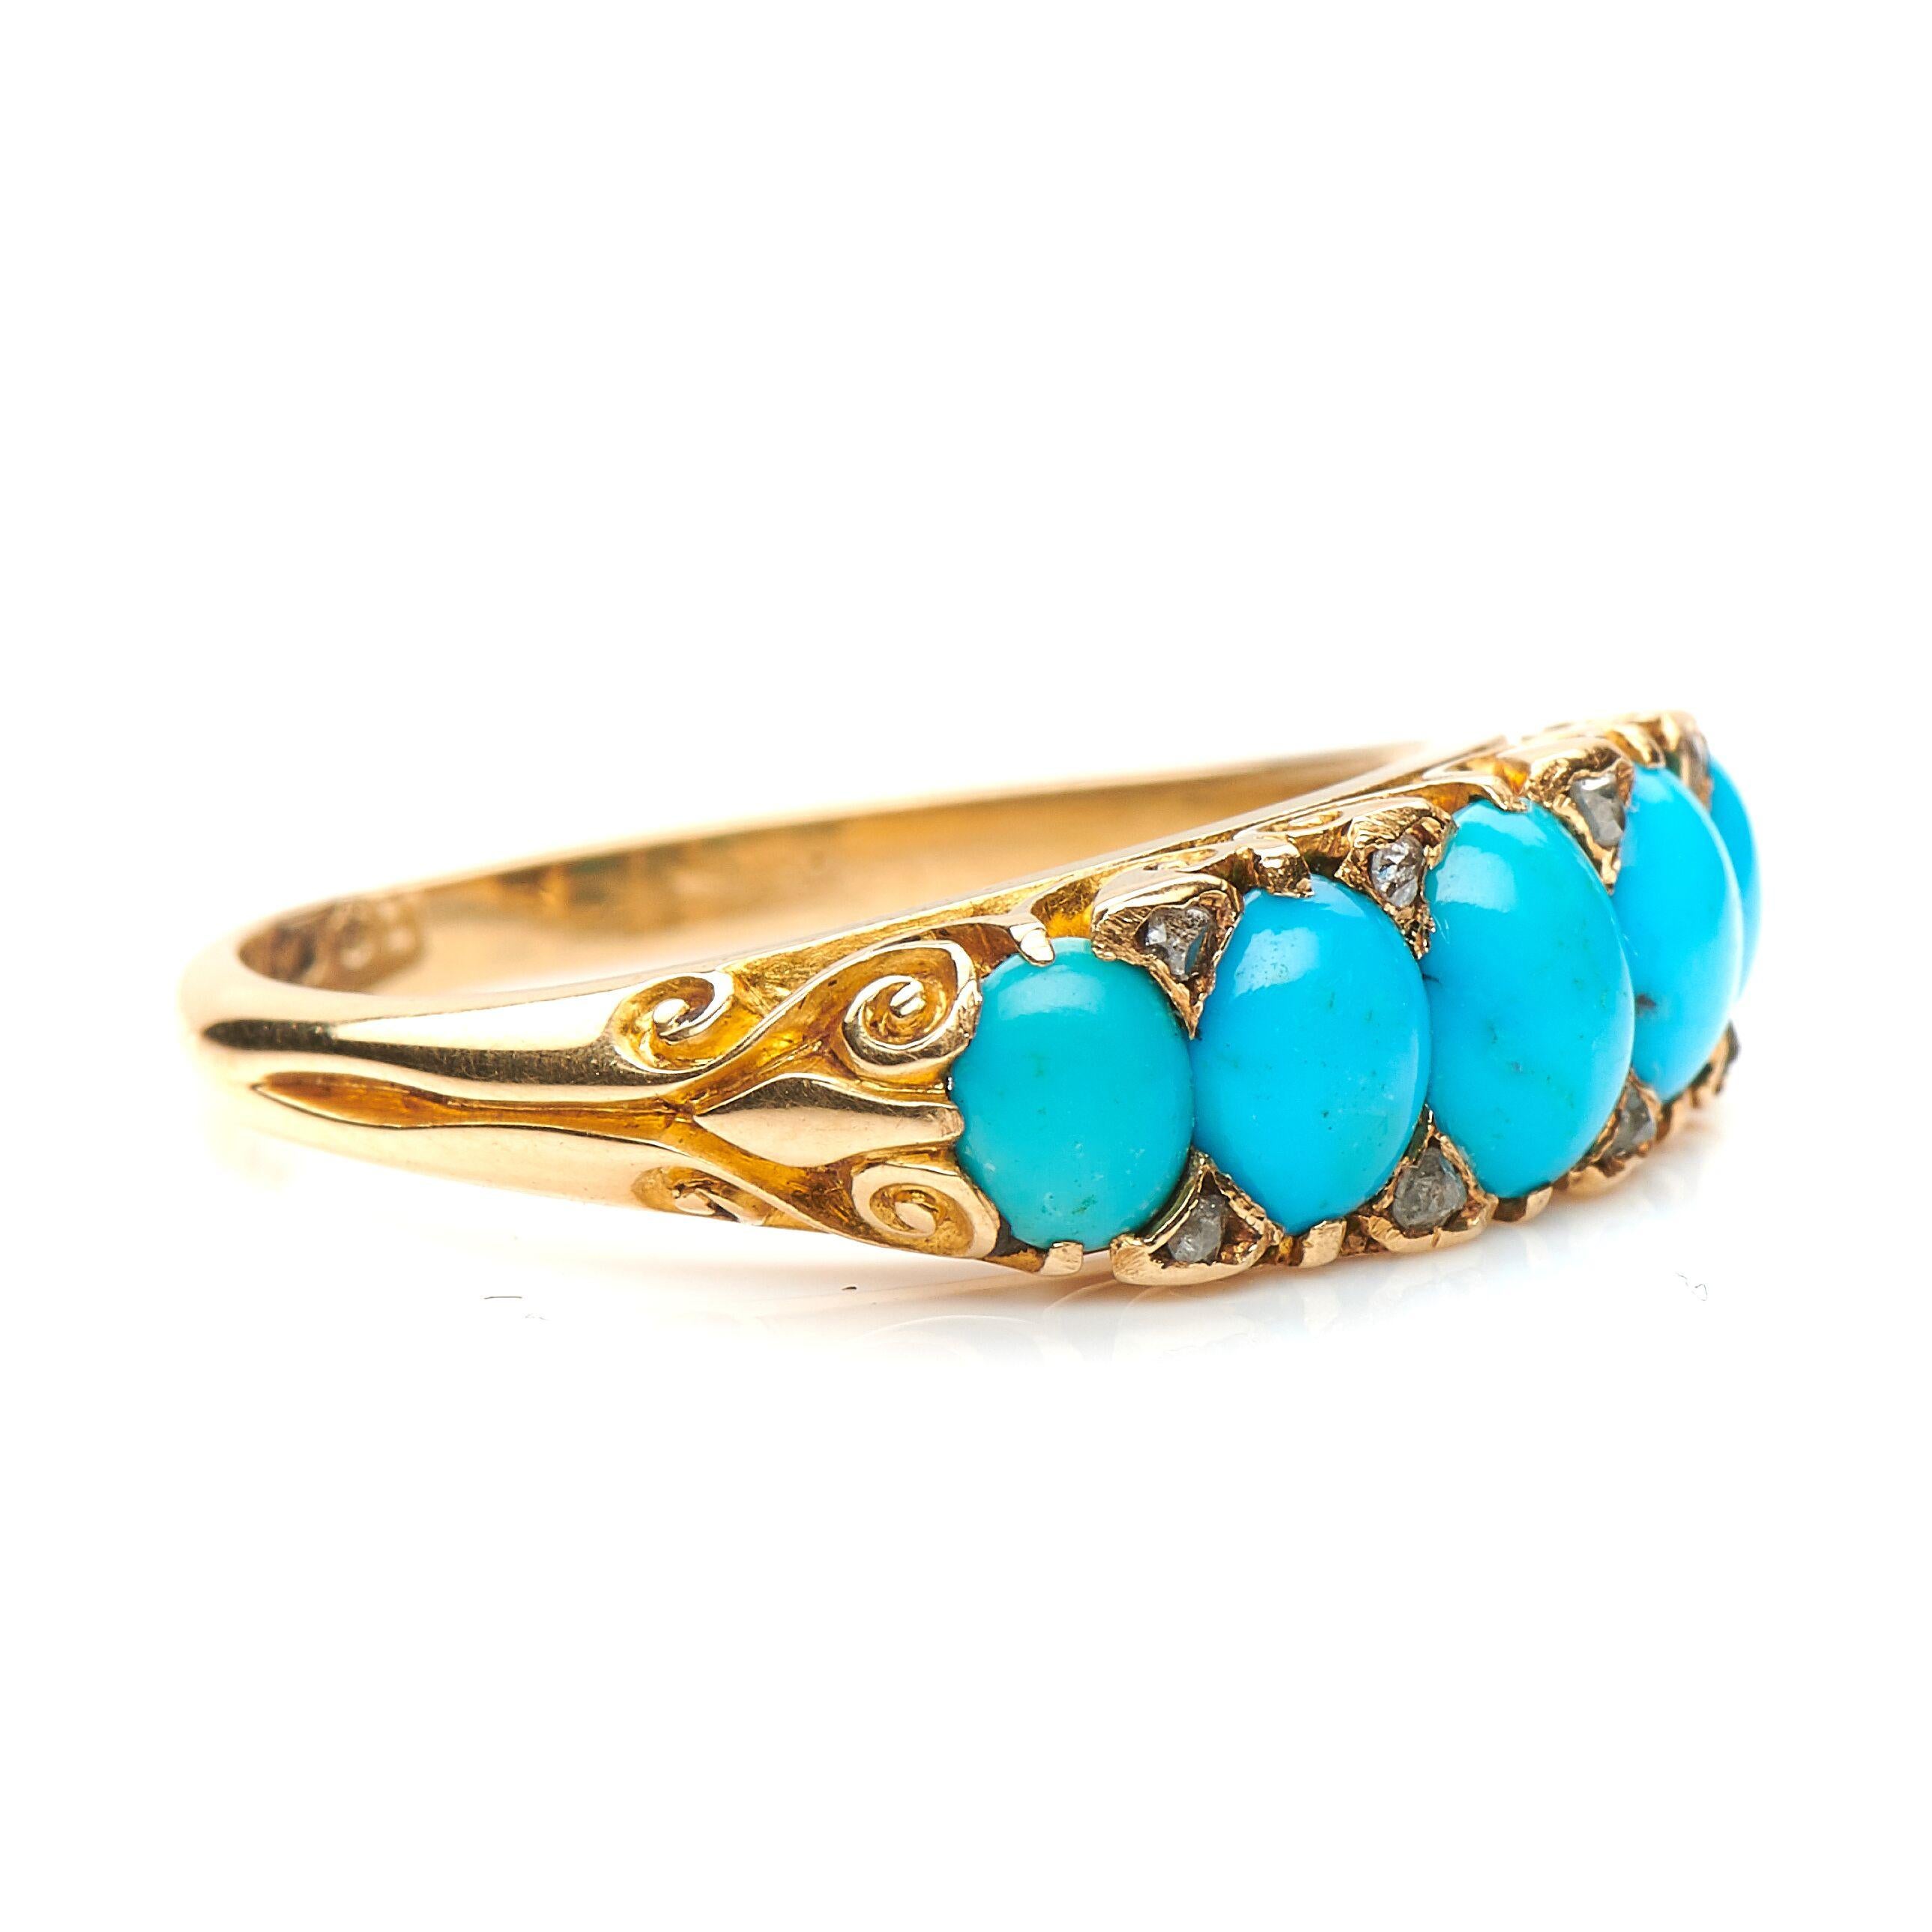 Victorian, natural turquoise and rose-cut diamond carved five stone ring, circa 1890. Set with five cabochon turquoise stones interspersed with small rose-cut diamond detail set in a wonderful finely pierced openwork gallery with a sinuous scroll